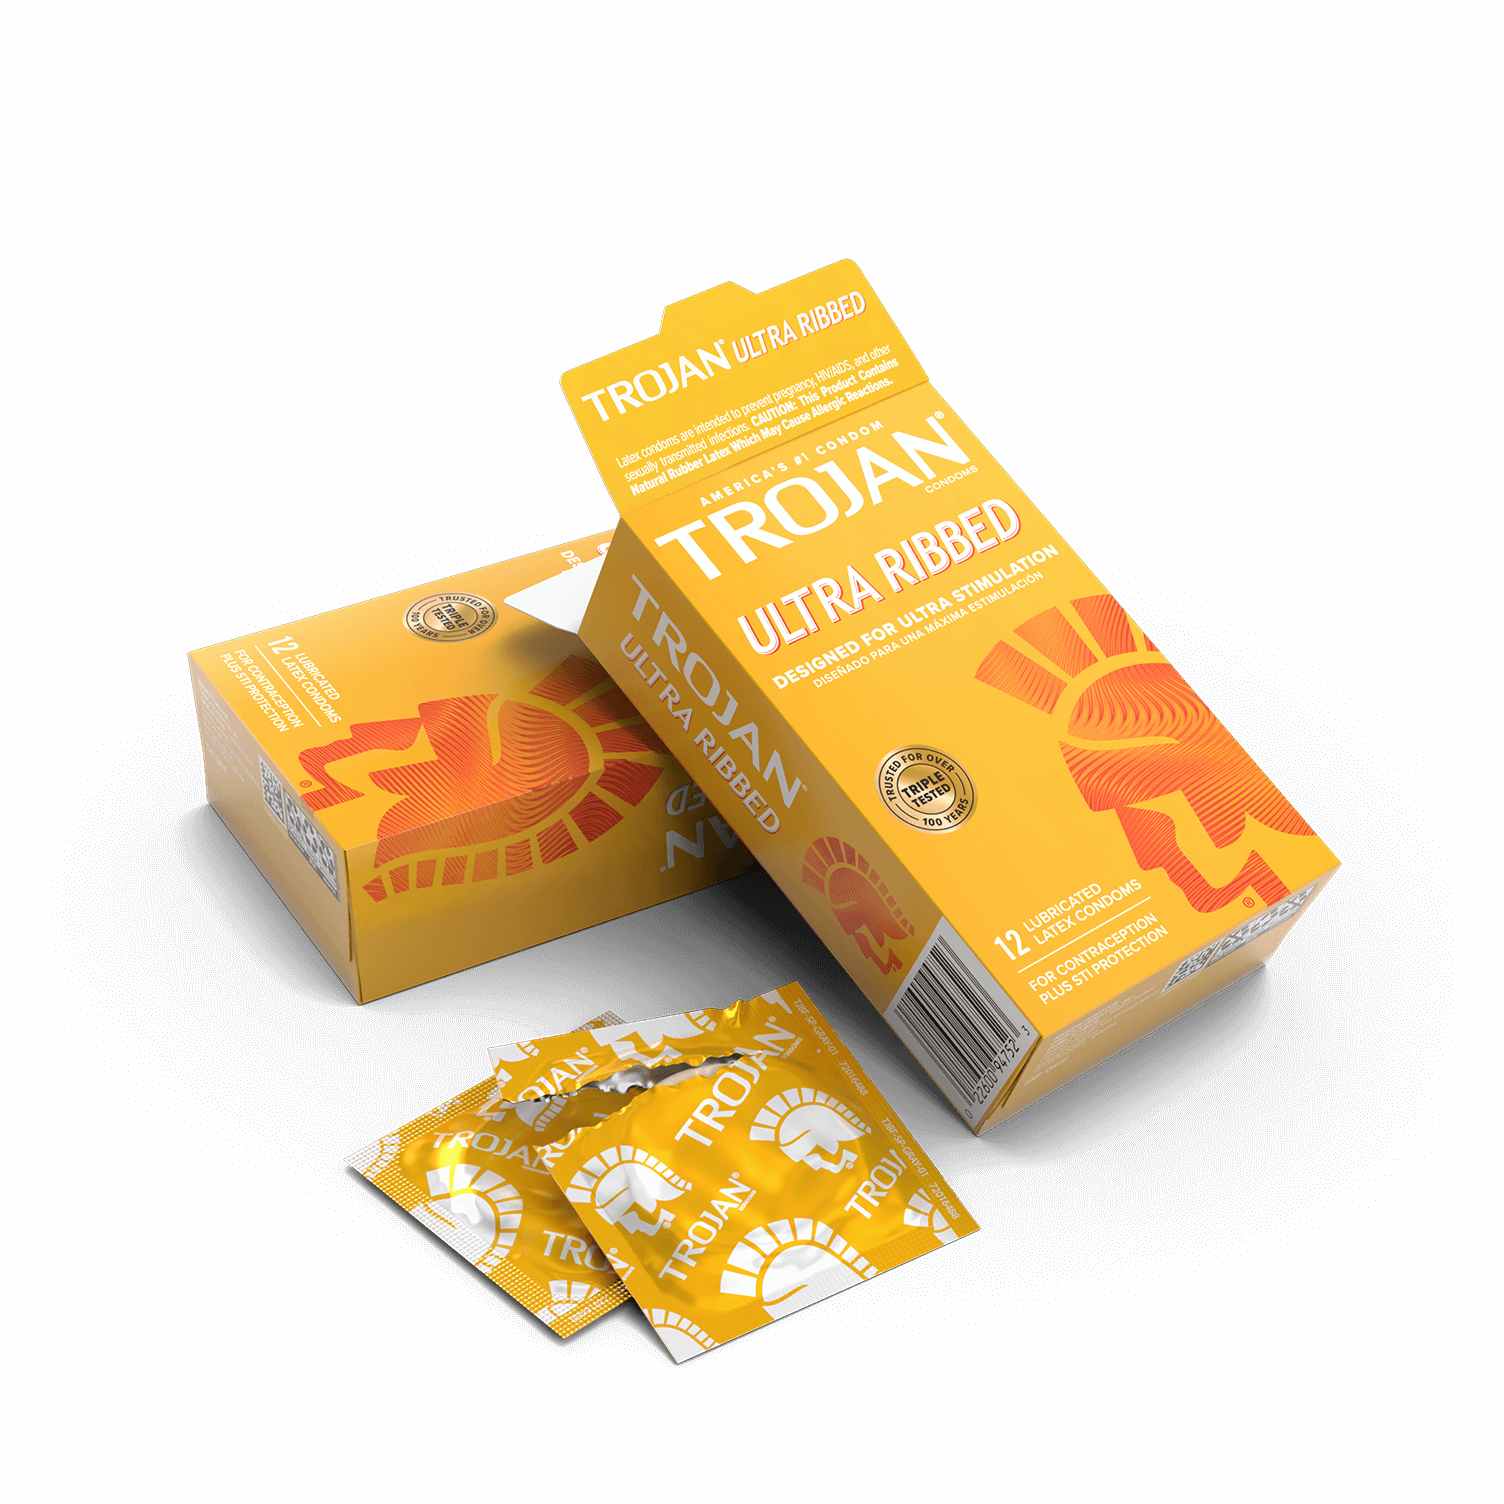 Trojan Ultra Ribbed Lubricated Condoms box and yellow wrappers.